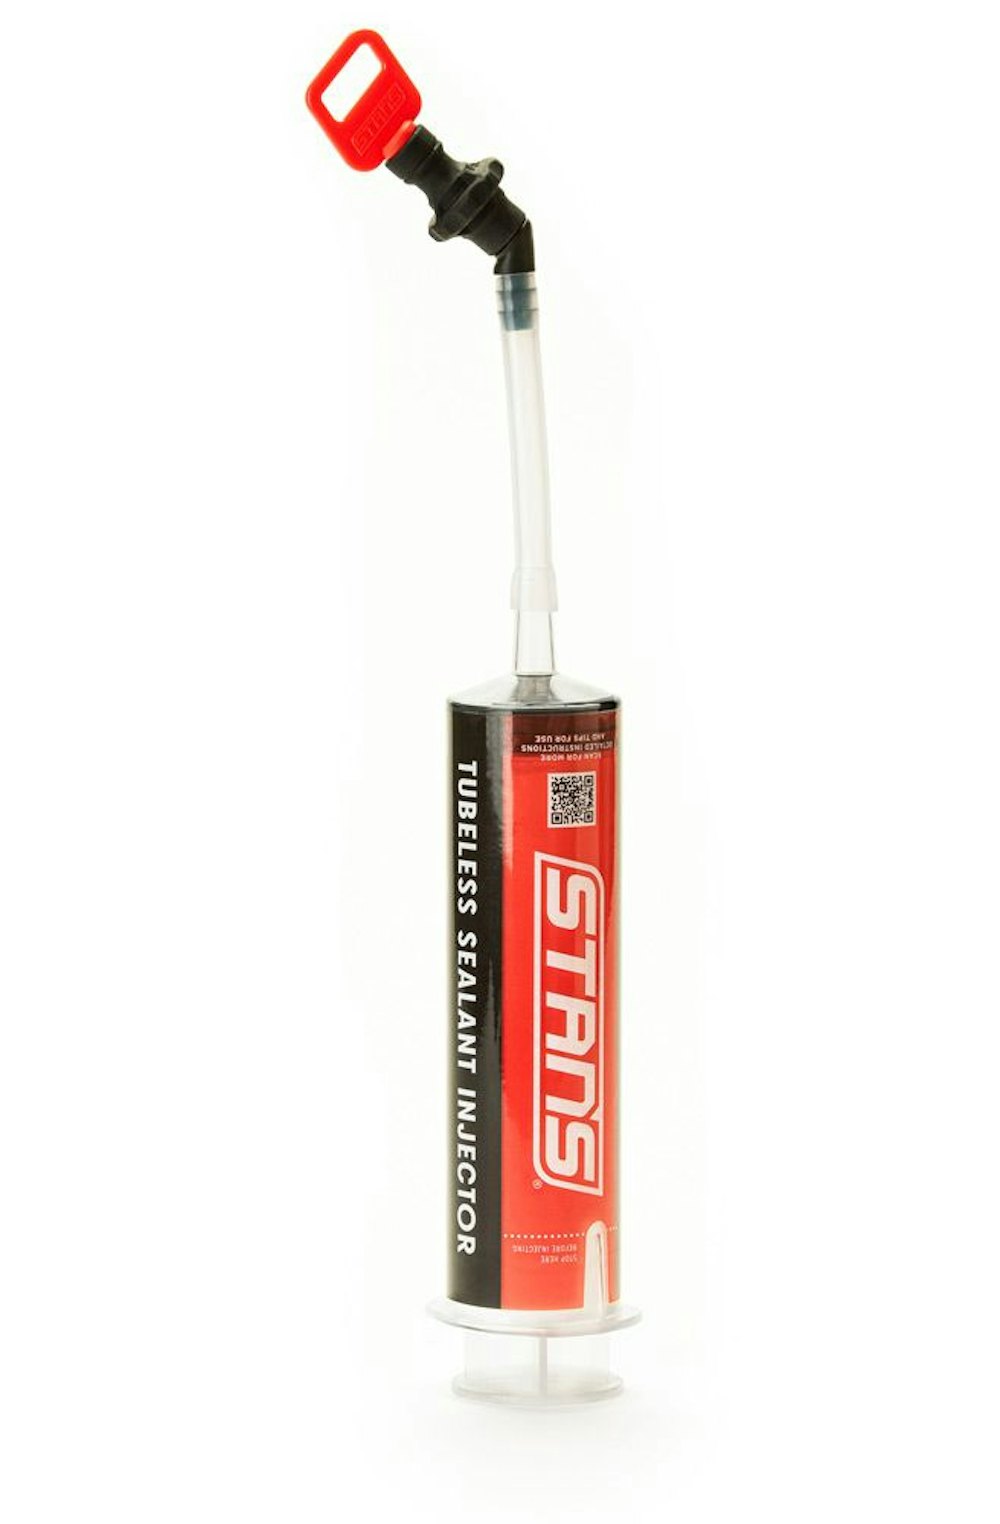 Stan's NoTubes Tire Sealant Injector